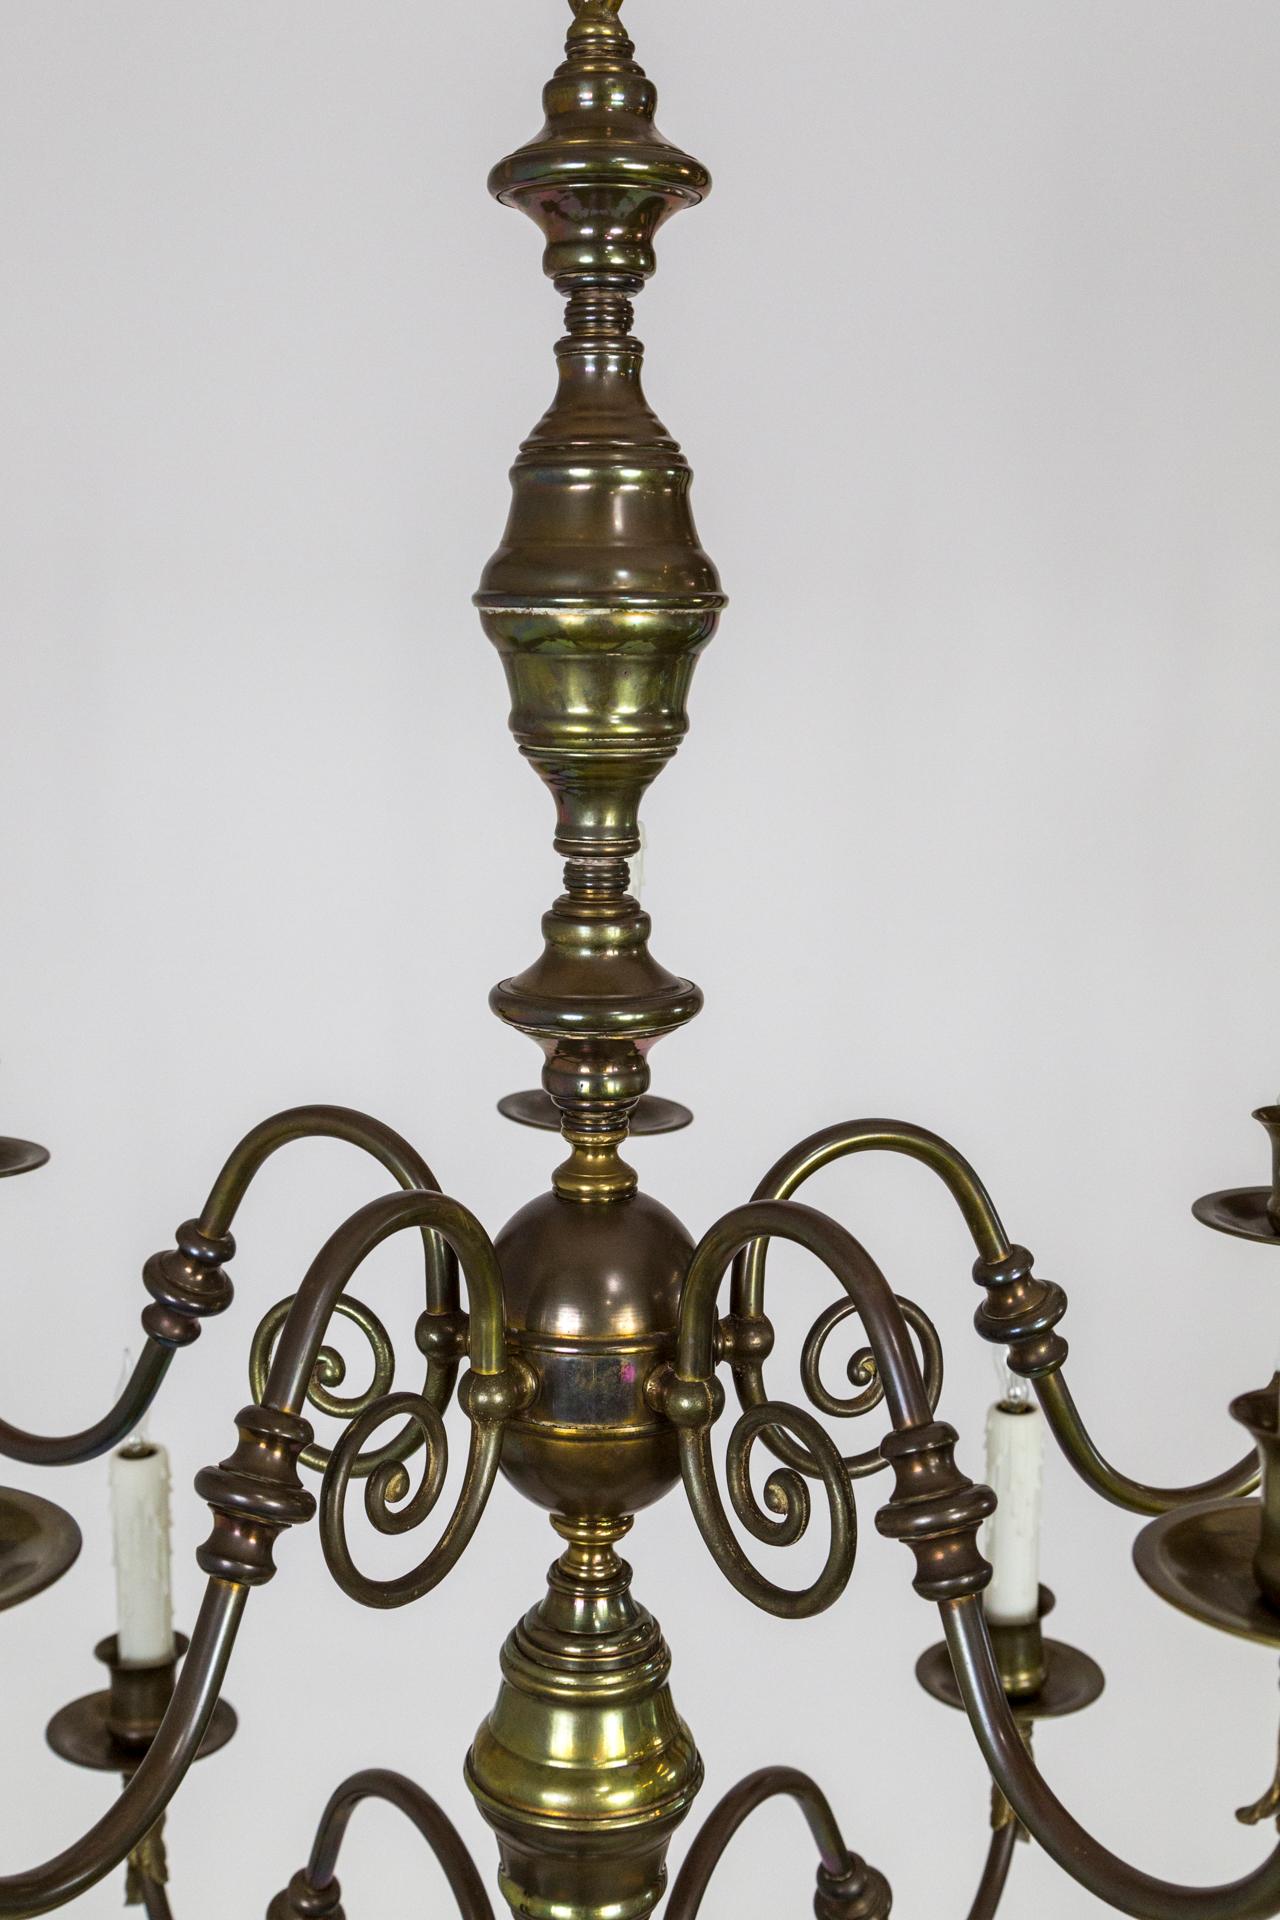 A spacious, Dutch Baroque style, 10-arm, brass chandelier with lovely decorative scroll work and acanthus leaf accents under the bobeches, and a well proportioned, large bottom ball. With a pleasing patina with areas of subtle iridescence.